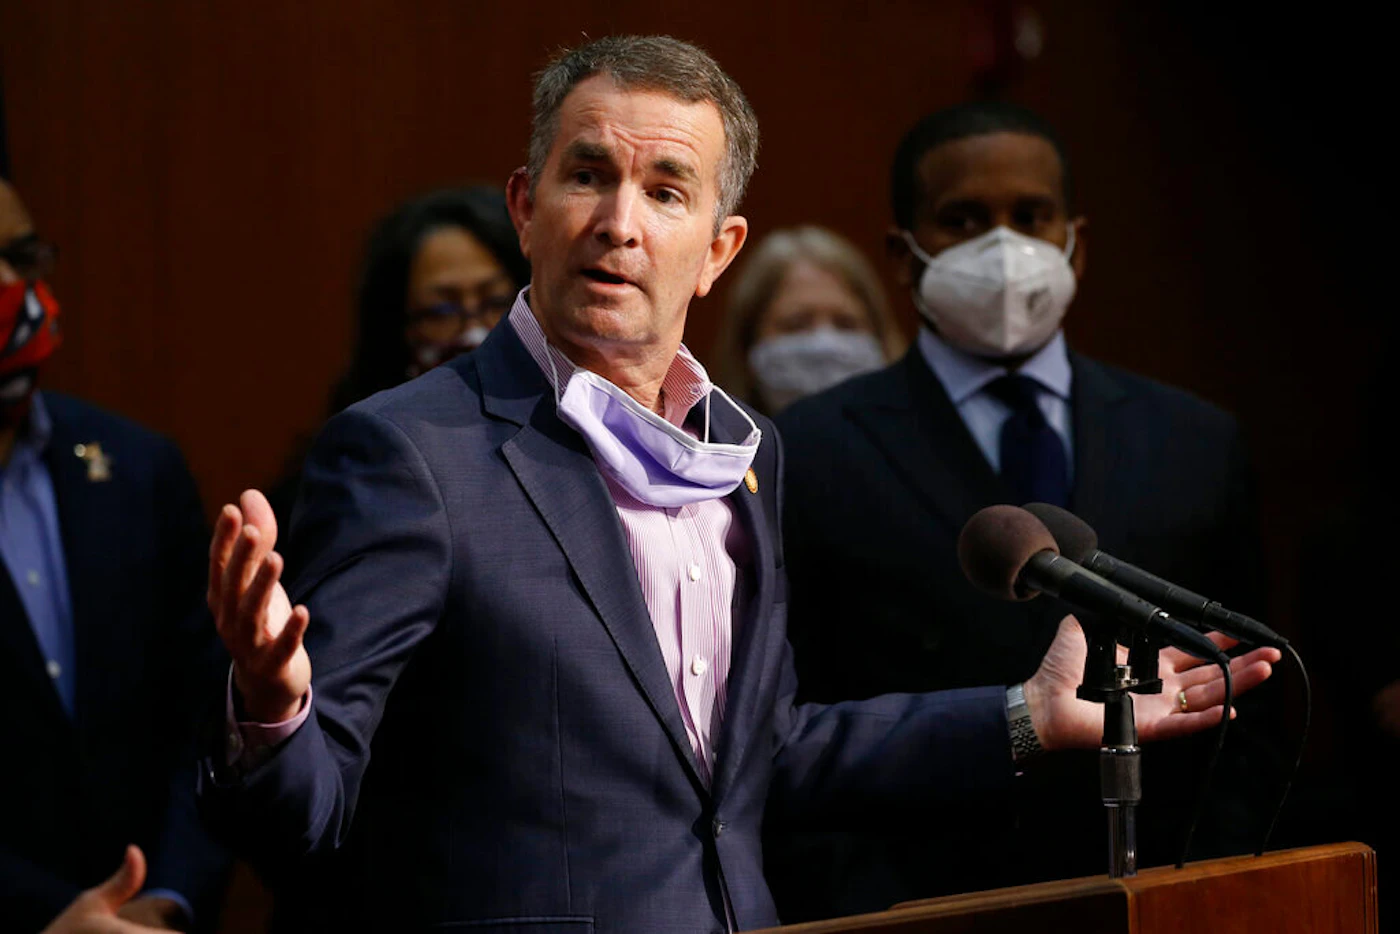 Gov. Ralph Northam speaks during a news conference in Richmond, Va. (AP Photo/Steve Helber, File)